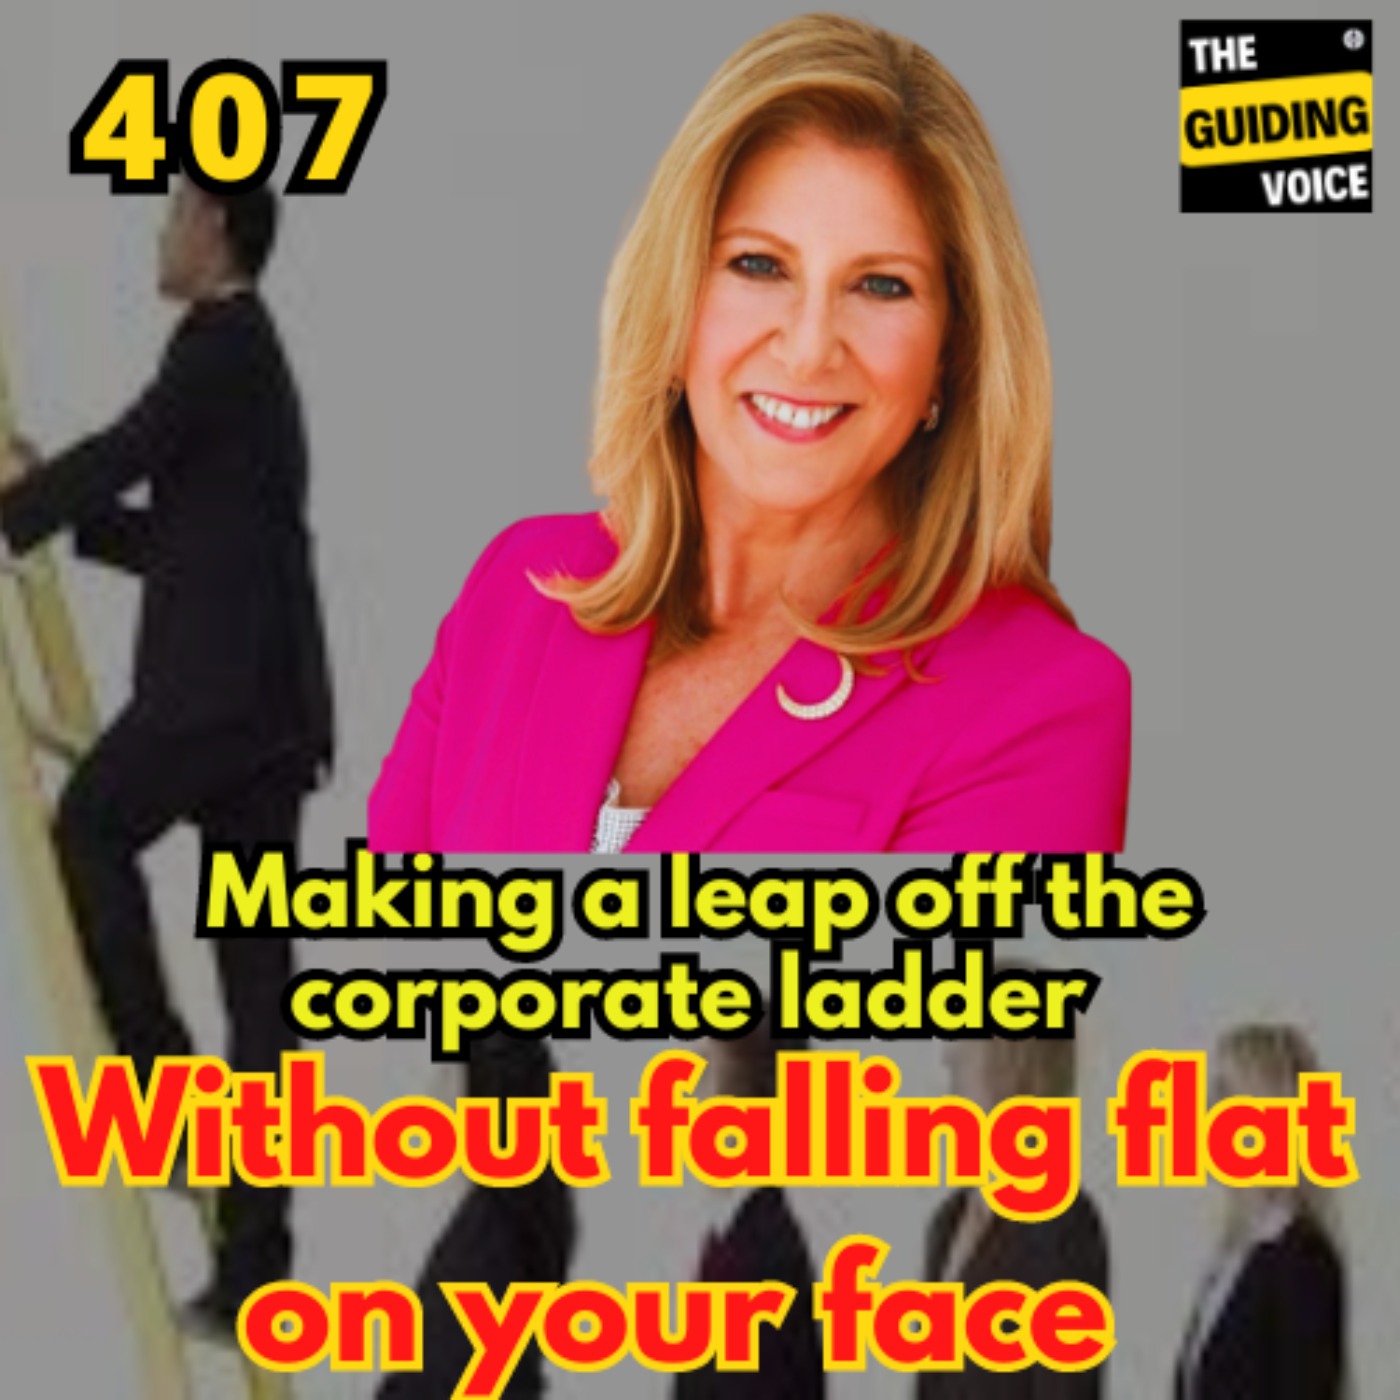 Making a leap off the corporate ladder without falling flat on your face | Genevieve Piturro | #TGV407